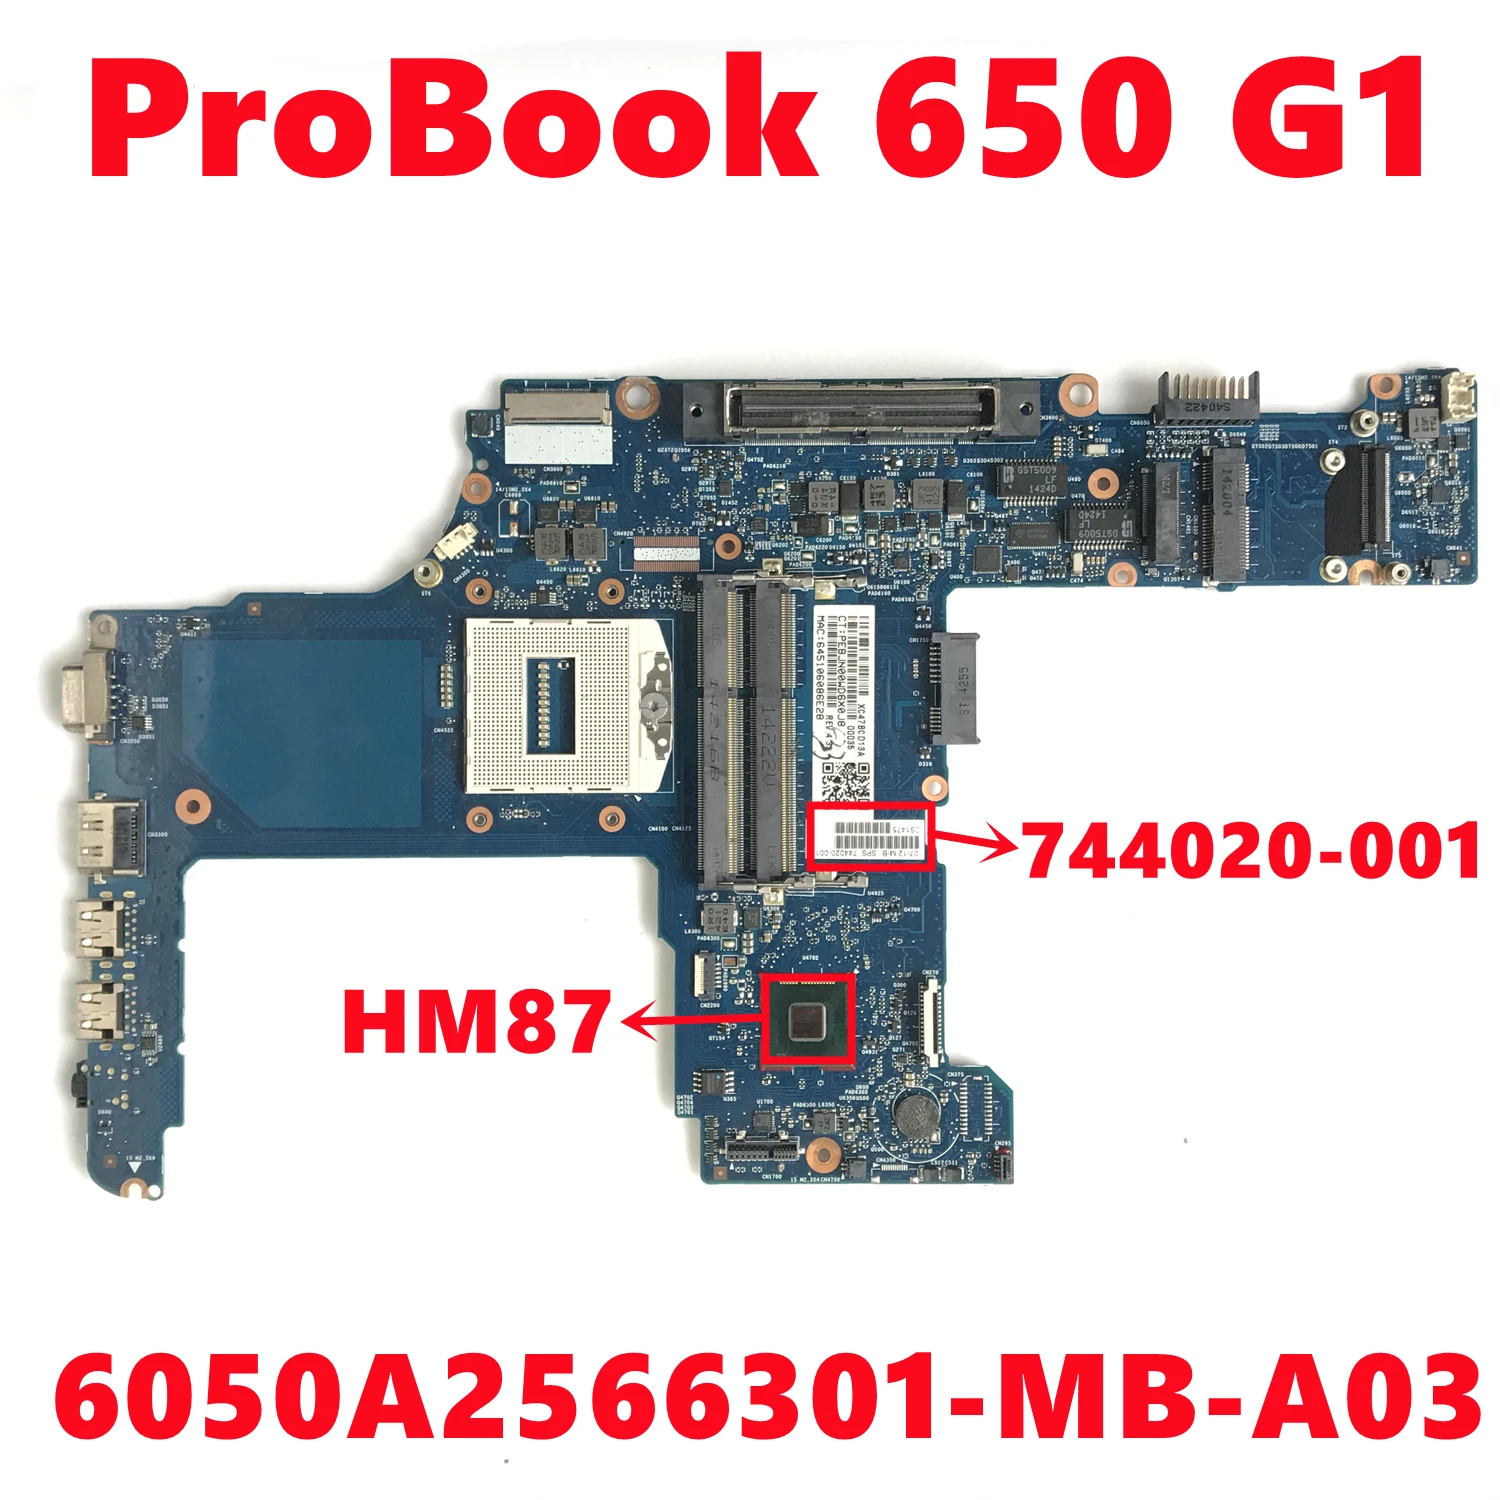 

744020-001 744020-501 744020-601 Mainboard For HP ProBook 650 G1 Laptop Motherboard 6050A2566301-MB-A03 DDR3 HM87 100% Tested OK